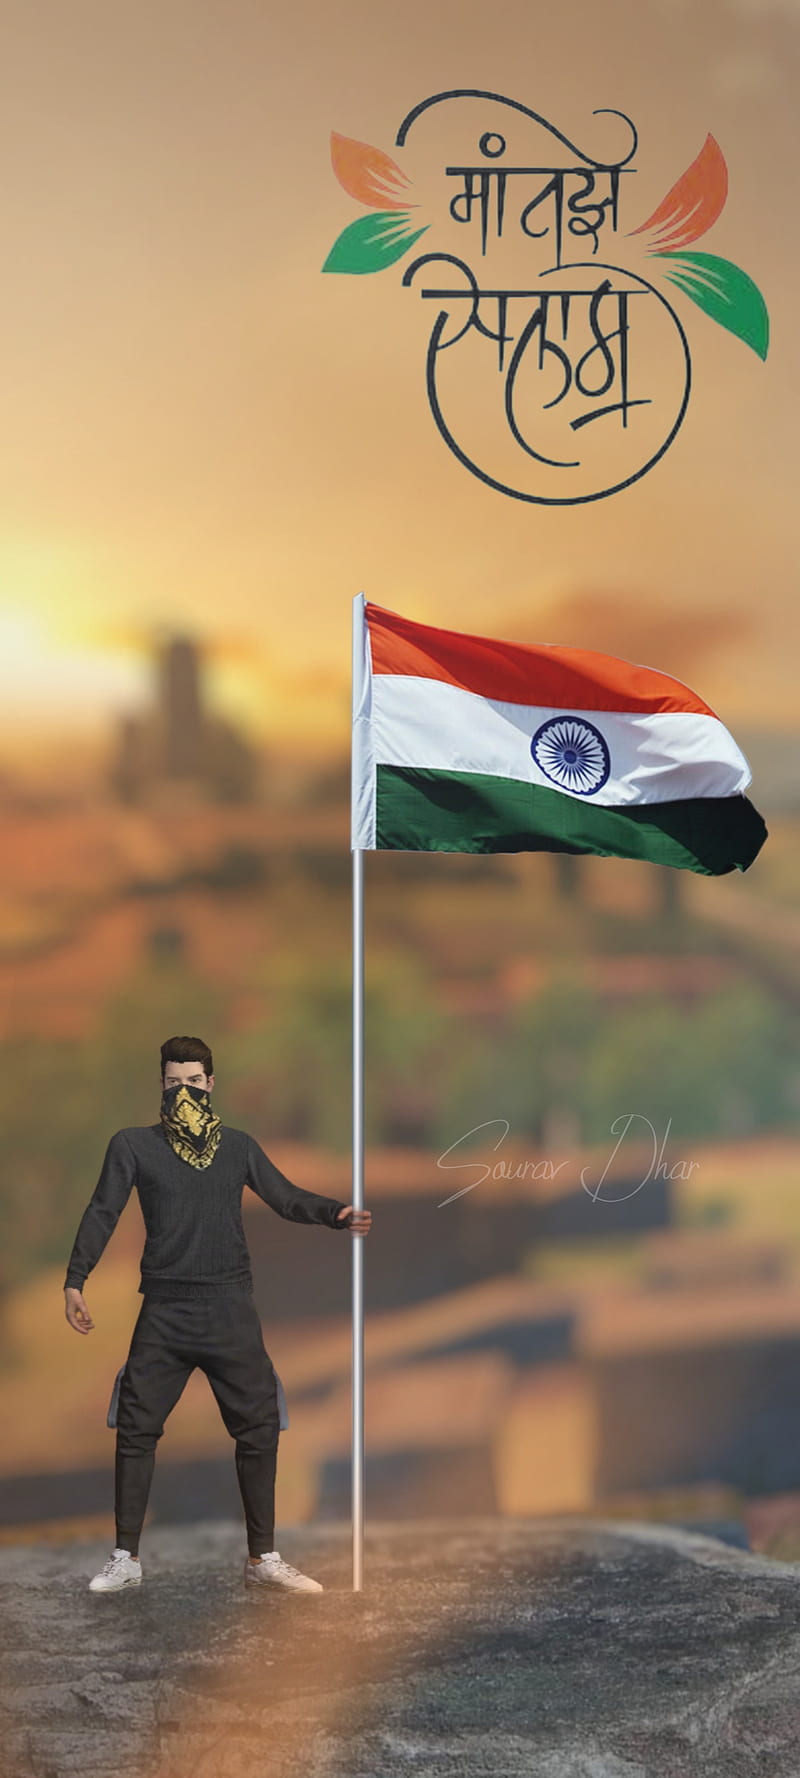 Rajput, 15 august, 26 january, army, independence day, indian, indian flag,  rajputana, HD phone wallpaper | Peakpx